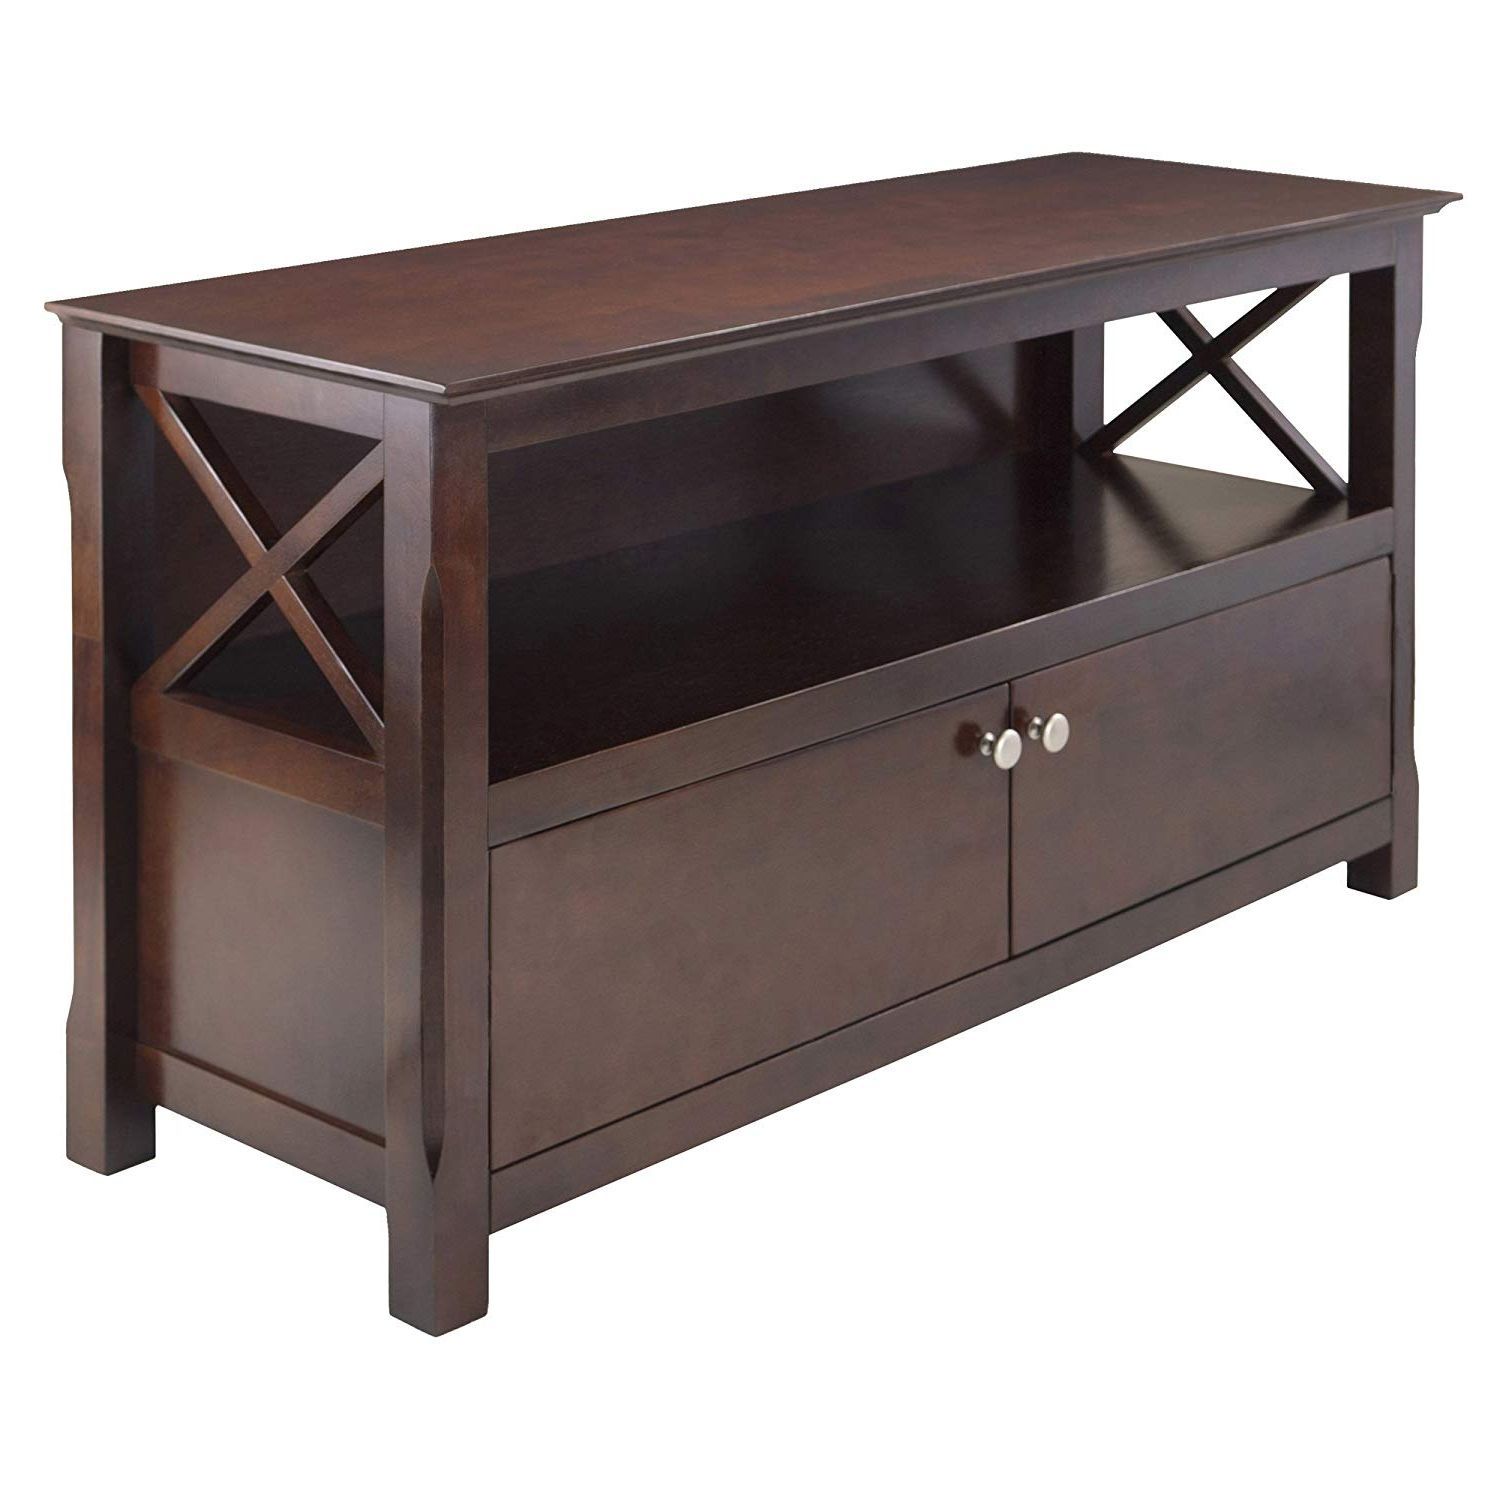 Amazon: Winsome Wood Xola Tv Stand: Kitchen & Dining For Most Recent Cheap Oak Tv Stands (View 6 of 20)